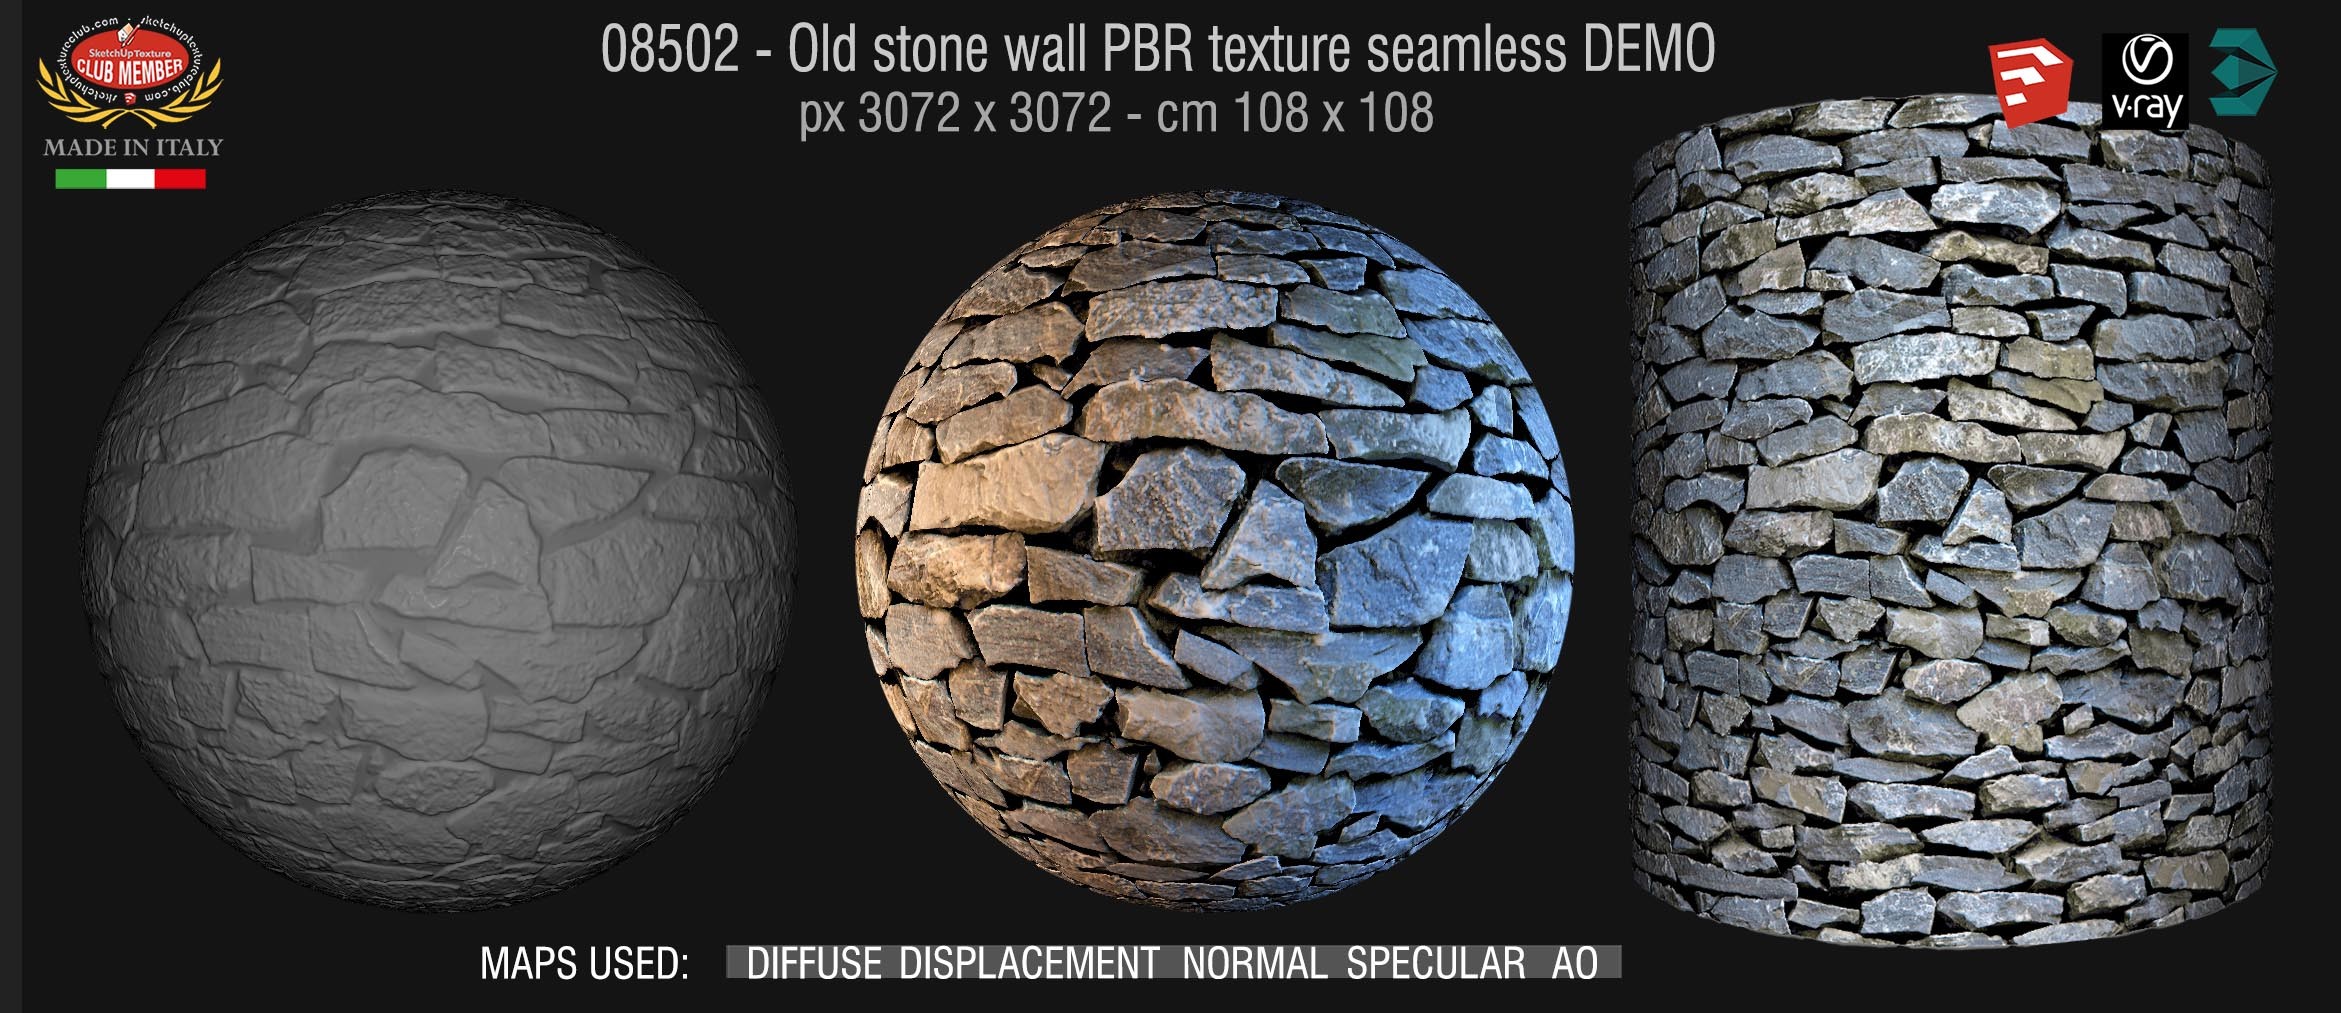 08502 Old stone wall PBR texture seamless DEMO